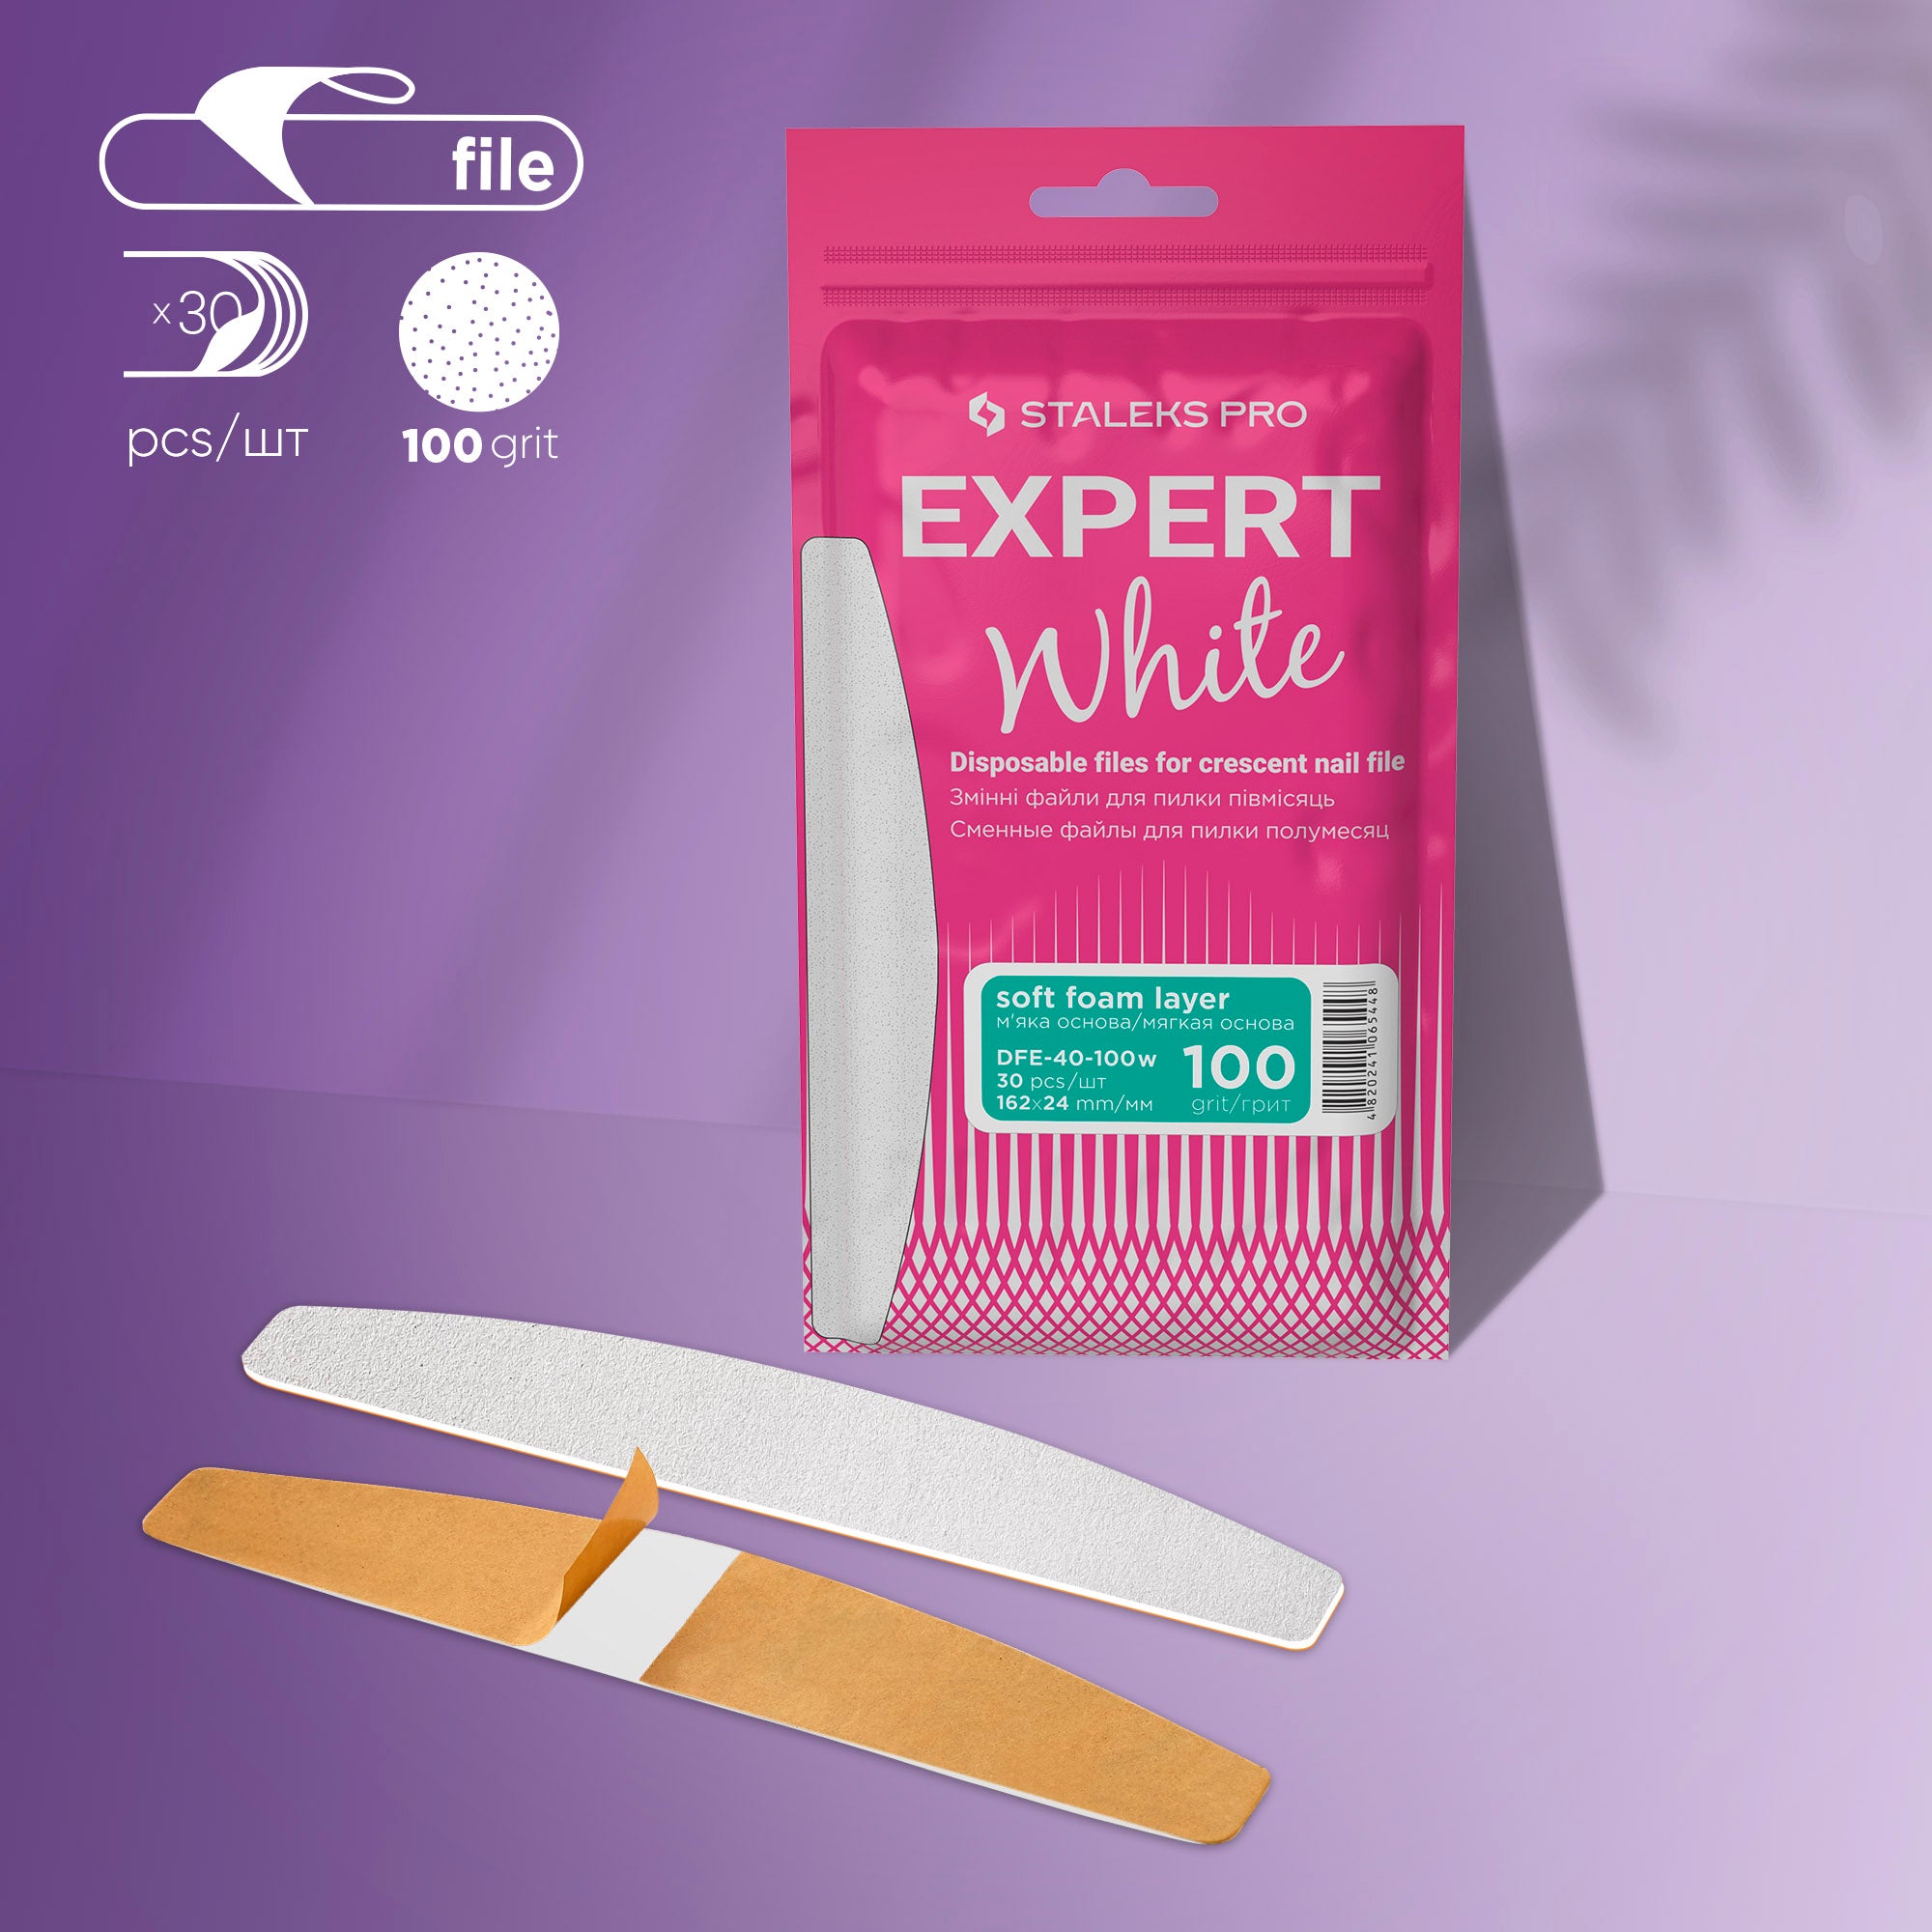 White disposable files for crescent nail file (soft base) EXPERT 40 (30 pcs)